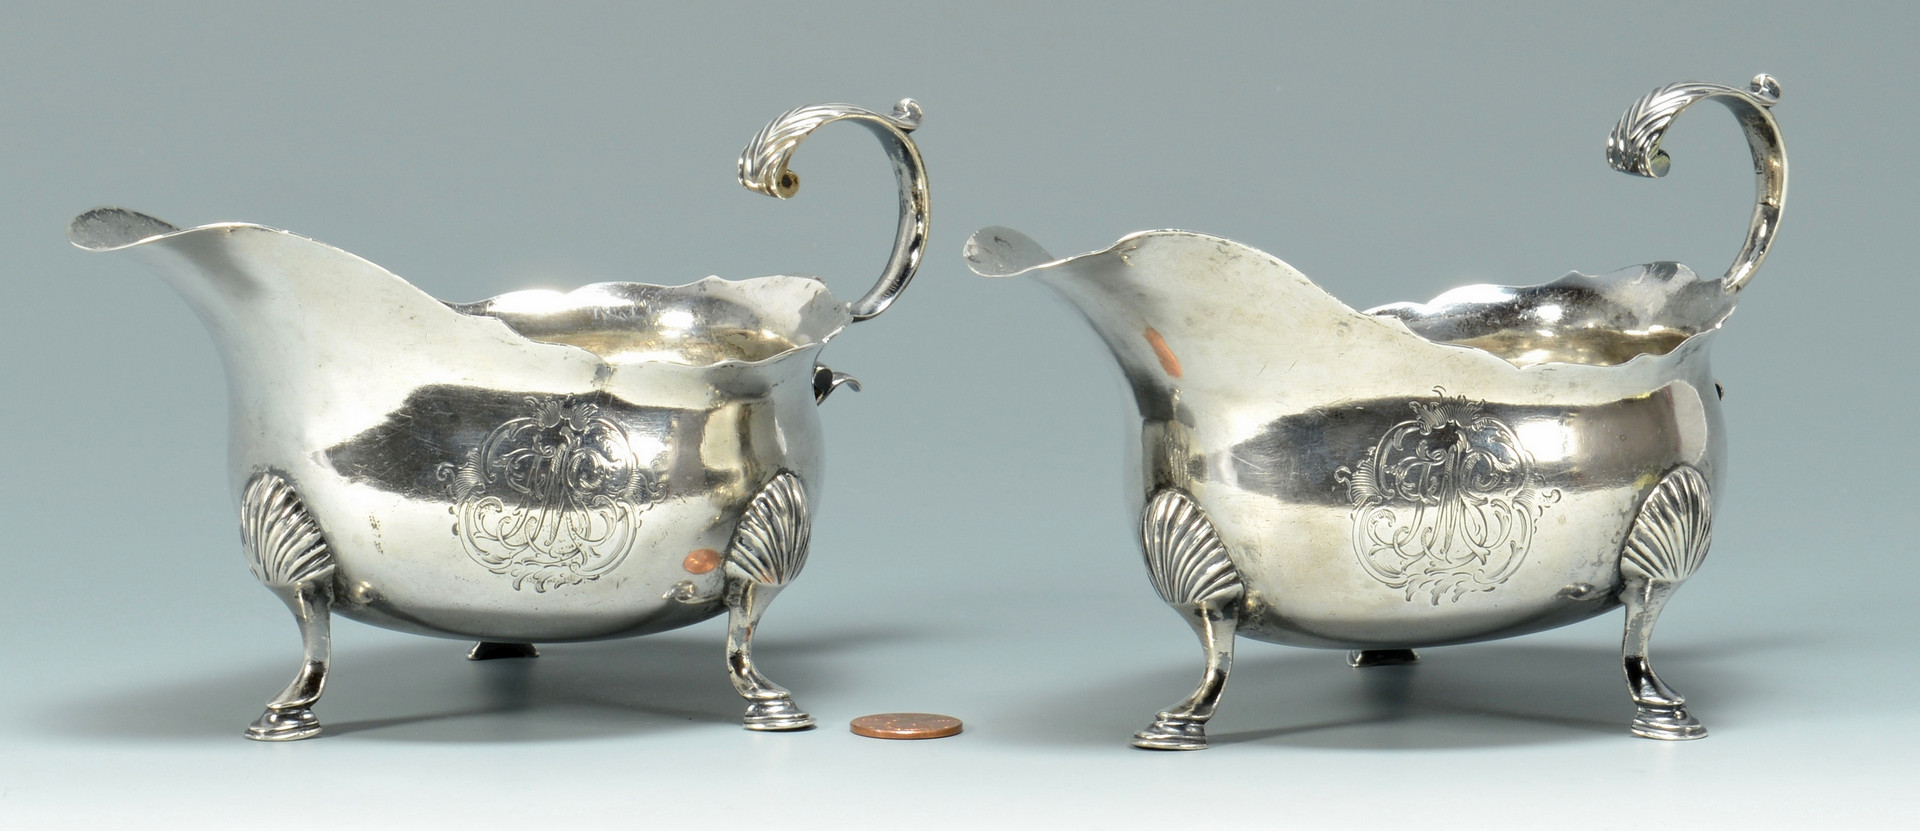 Lot 274: Pair 18th c. NY/Fueter Silver Sauceboats